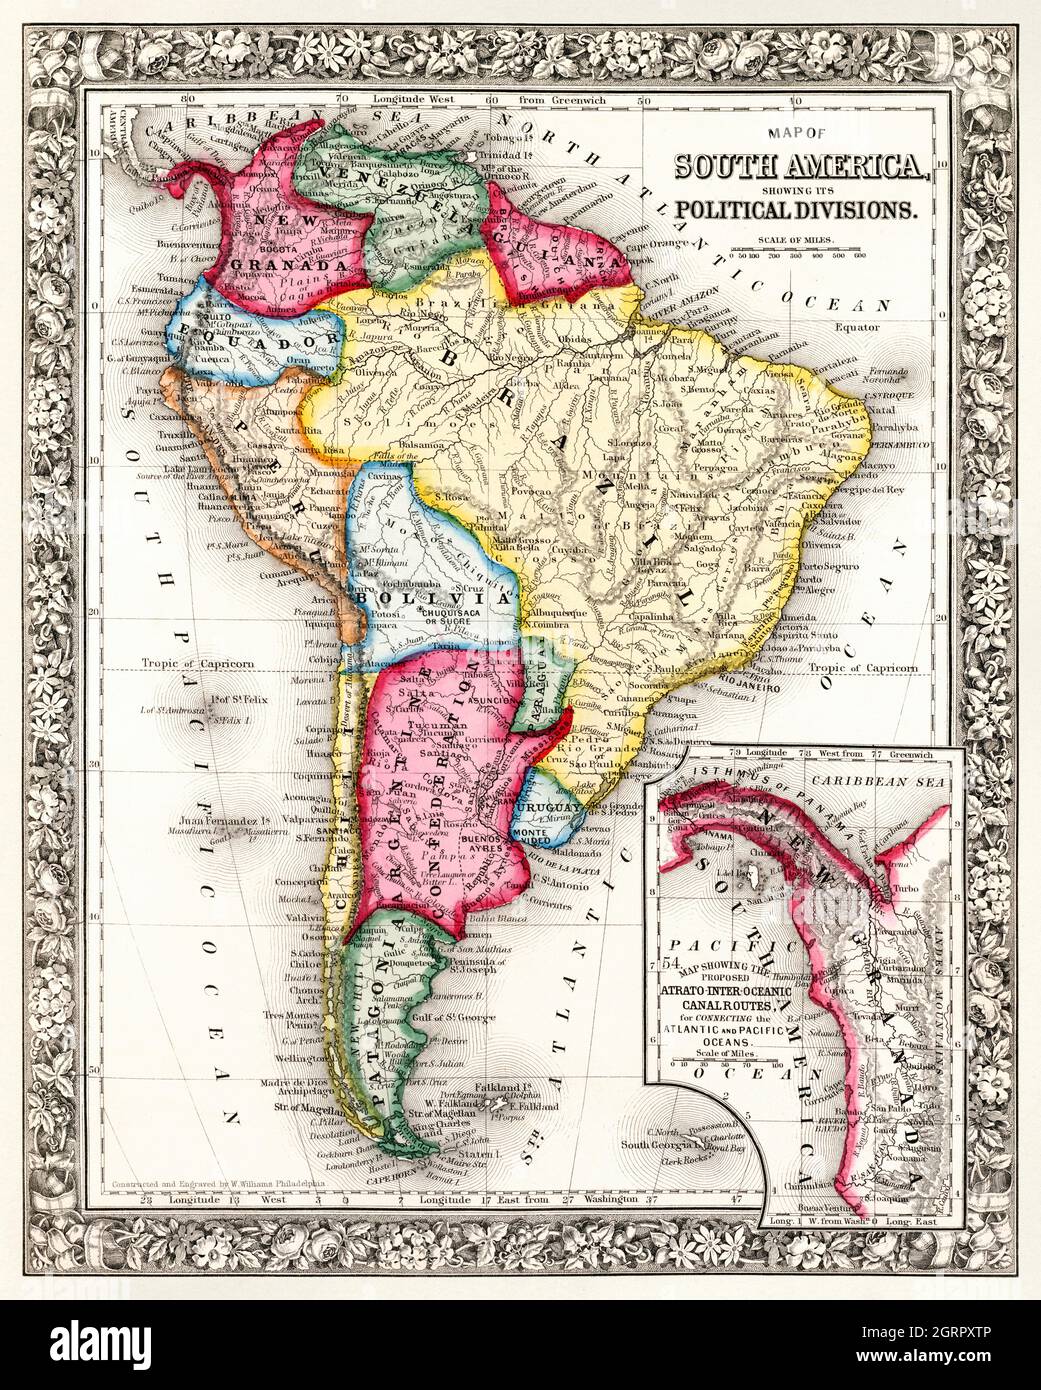 Map of South America, showing its political divisions; Map showing the proposed Atrato-inter-oceanic canalroutes, for connecting the Atlantic and... Stock Photo